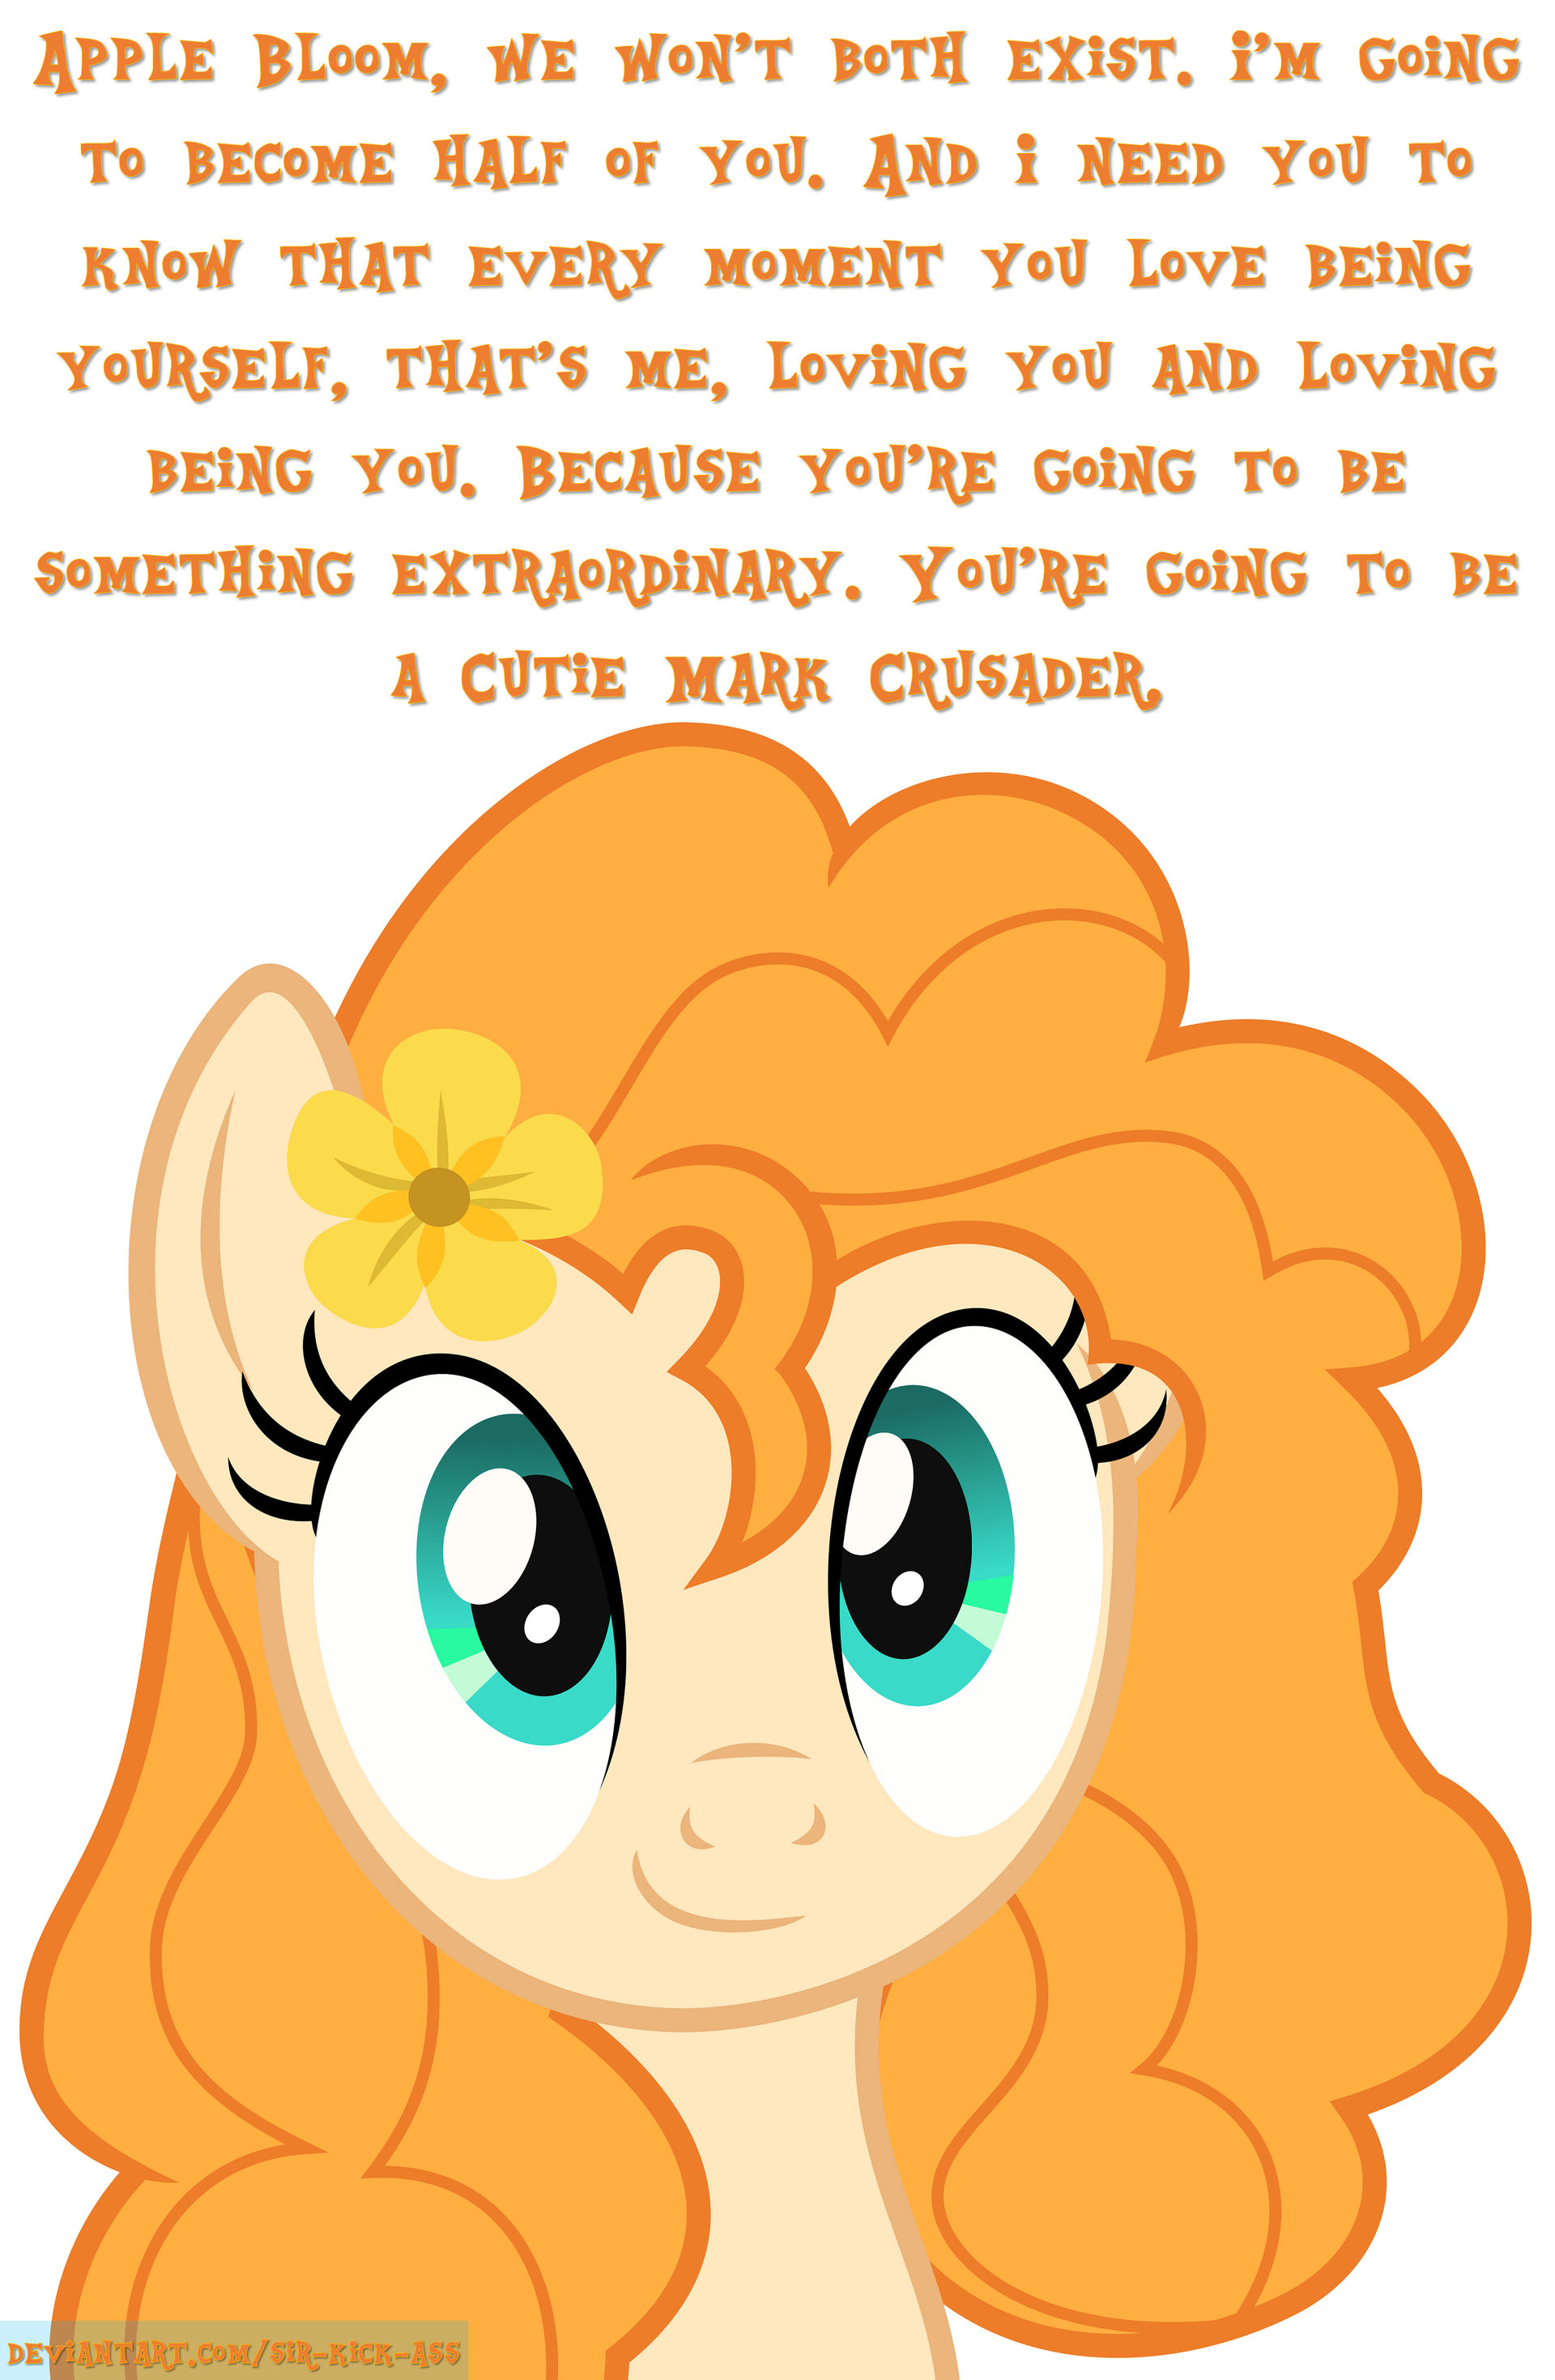 Pear Butter's Message to Apple Bloom